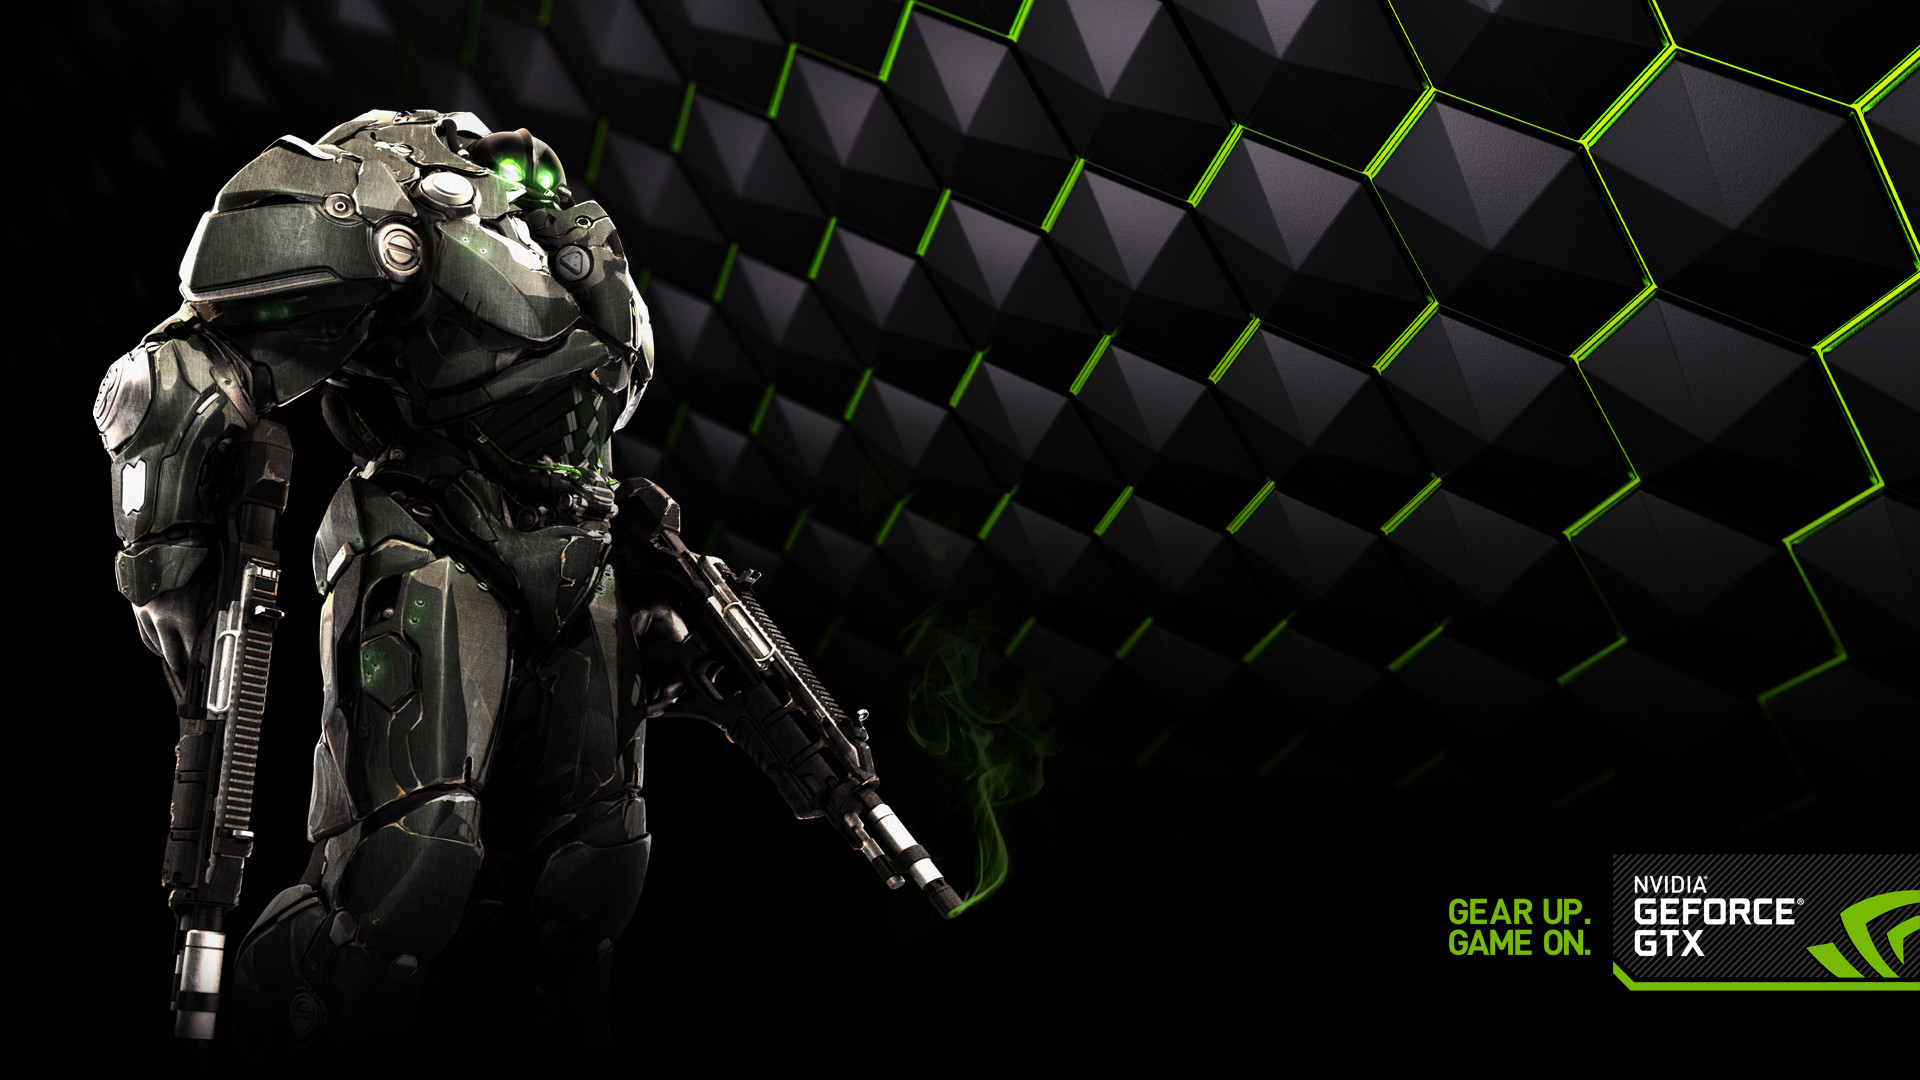 1920x1080 Gallery images and information: Nvidia Evga Wallpaper 